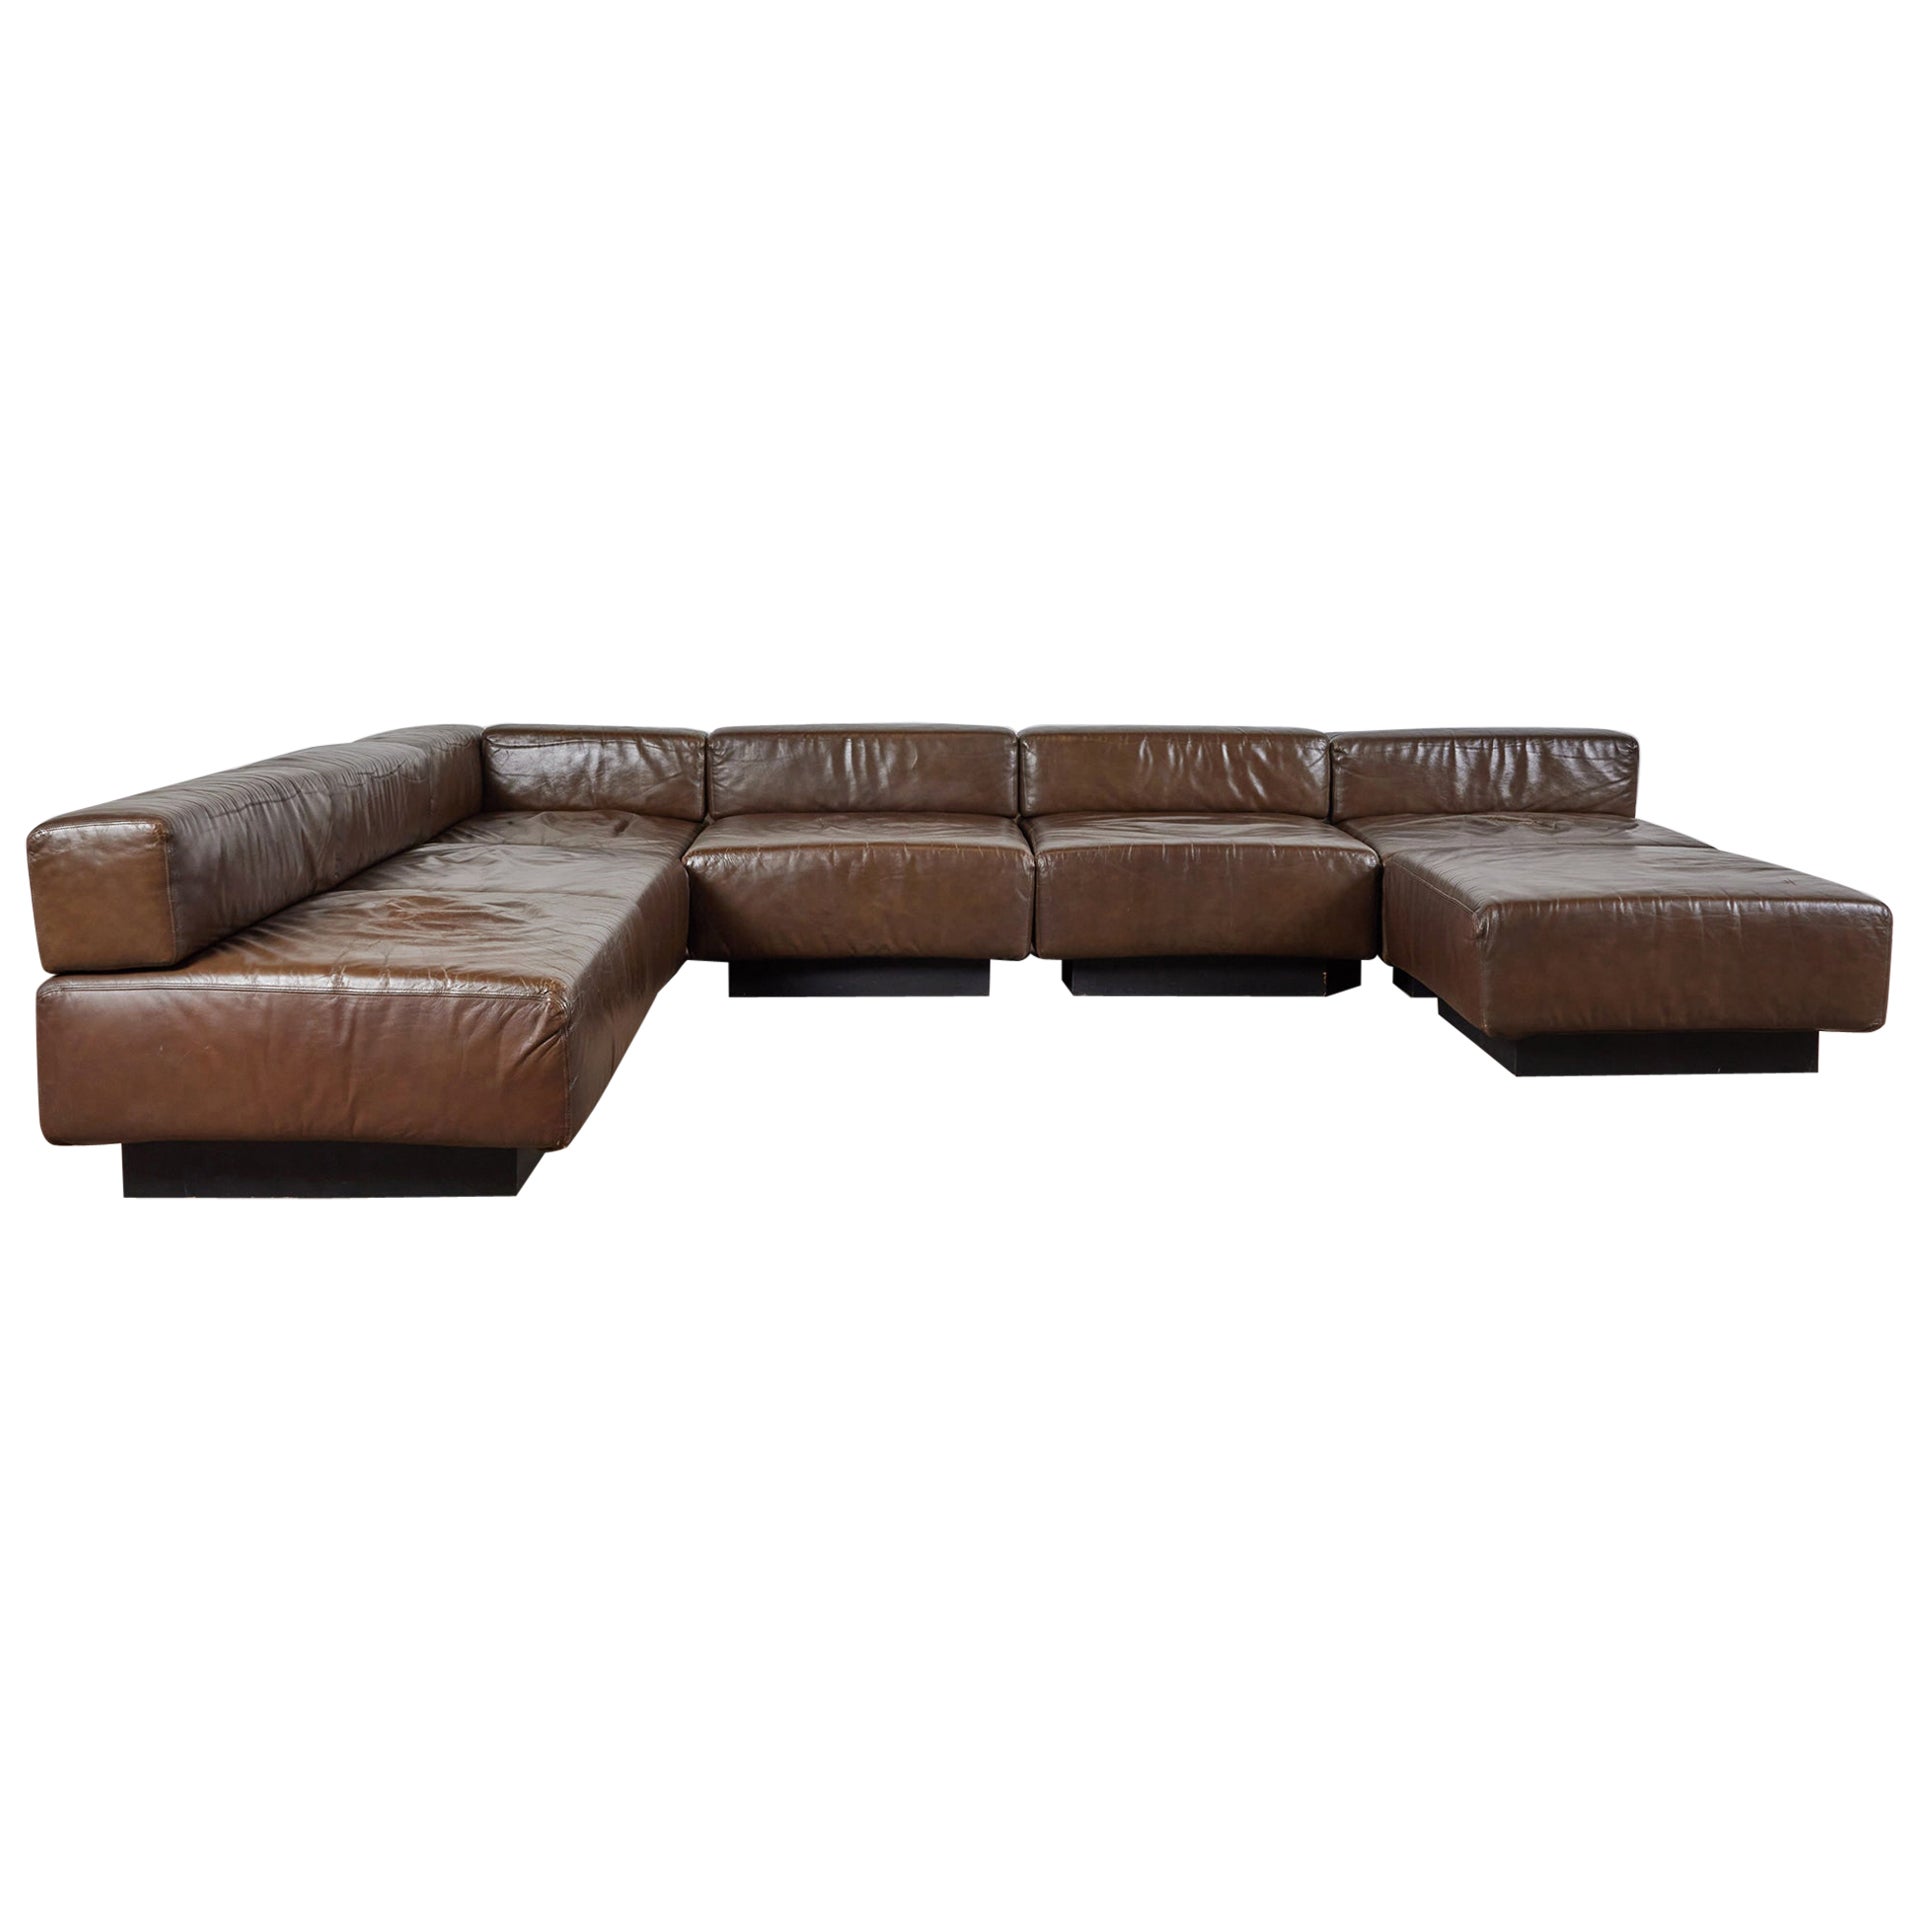  Harvey Probber "Cubo" Sectional Leather Sofa